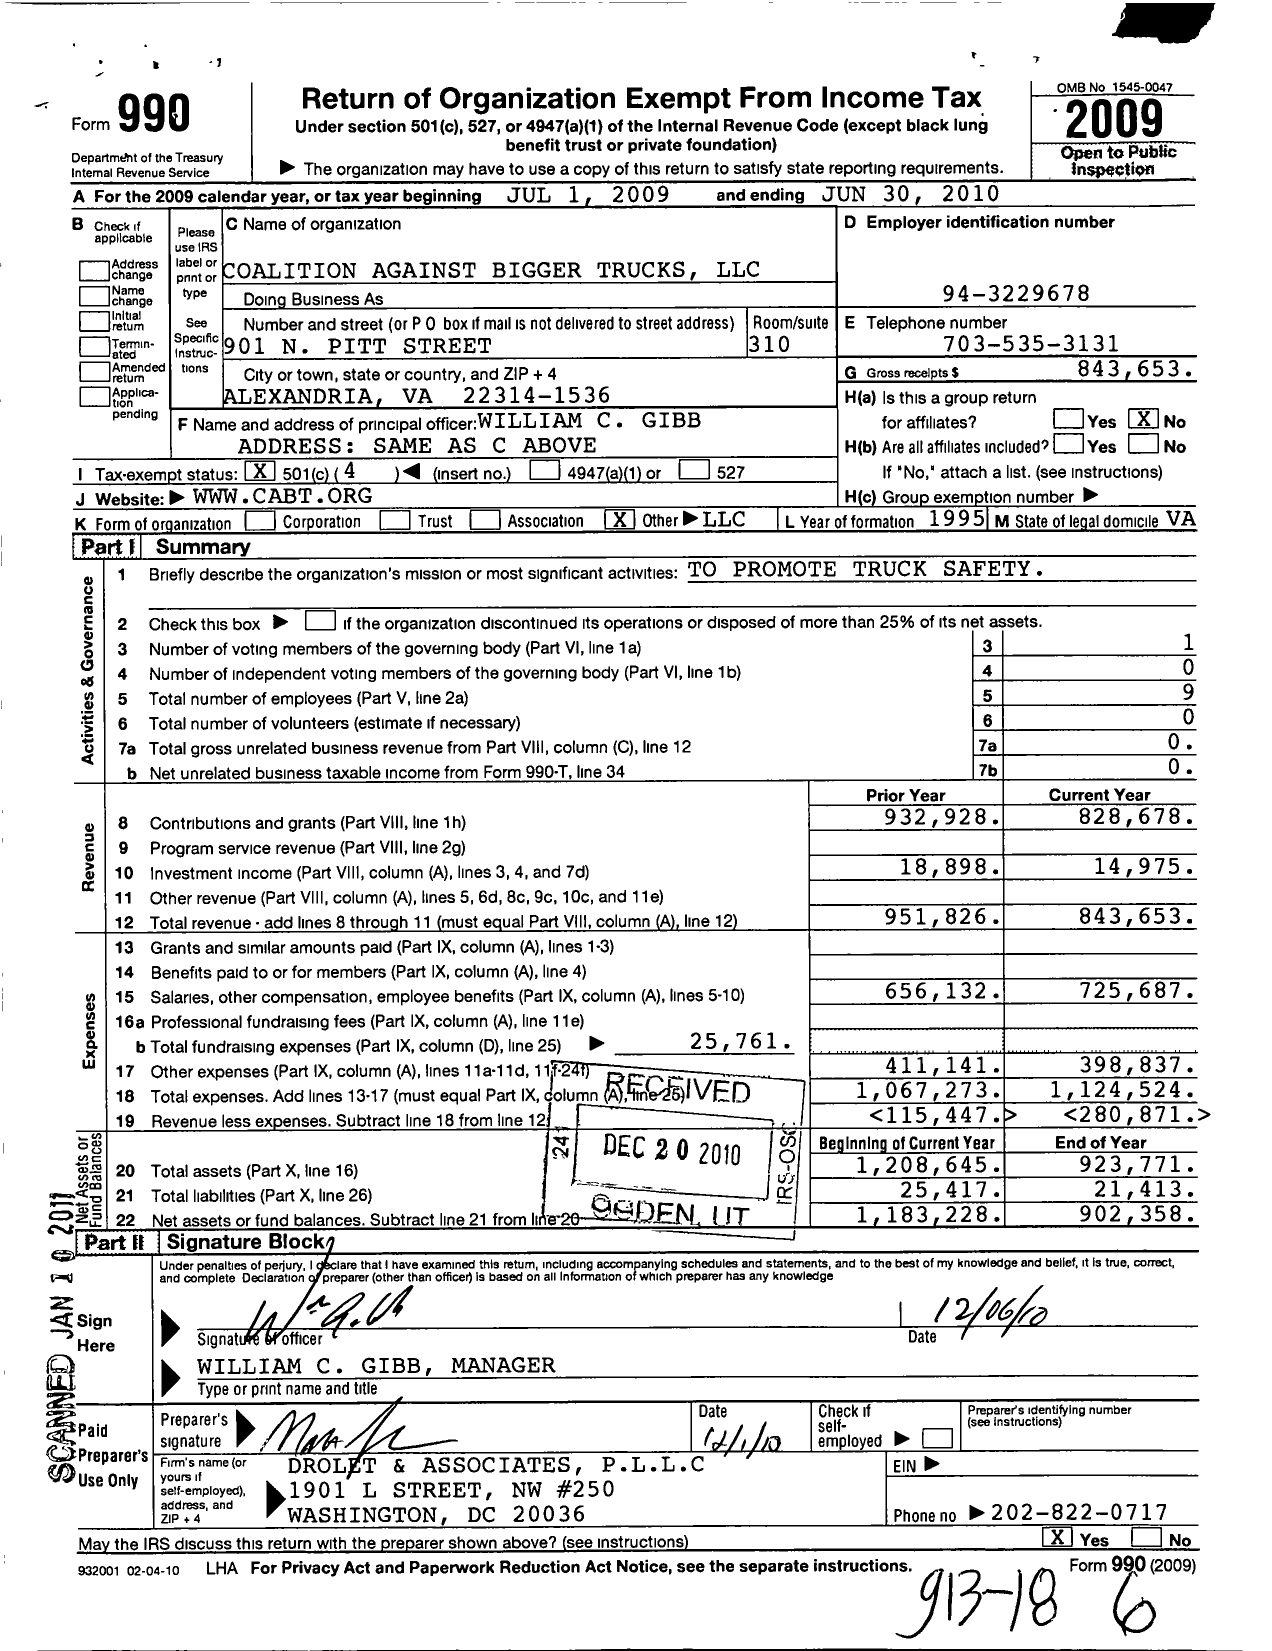 Image of first page of 2009 Form 990O for Coalition Against Bigger Trucks LLC